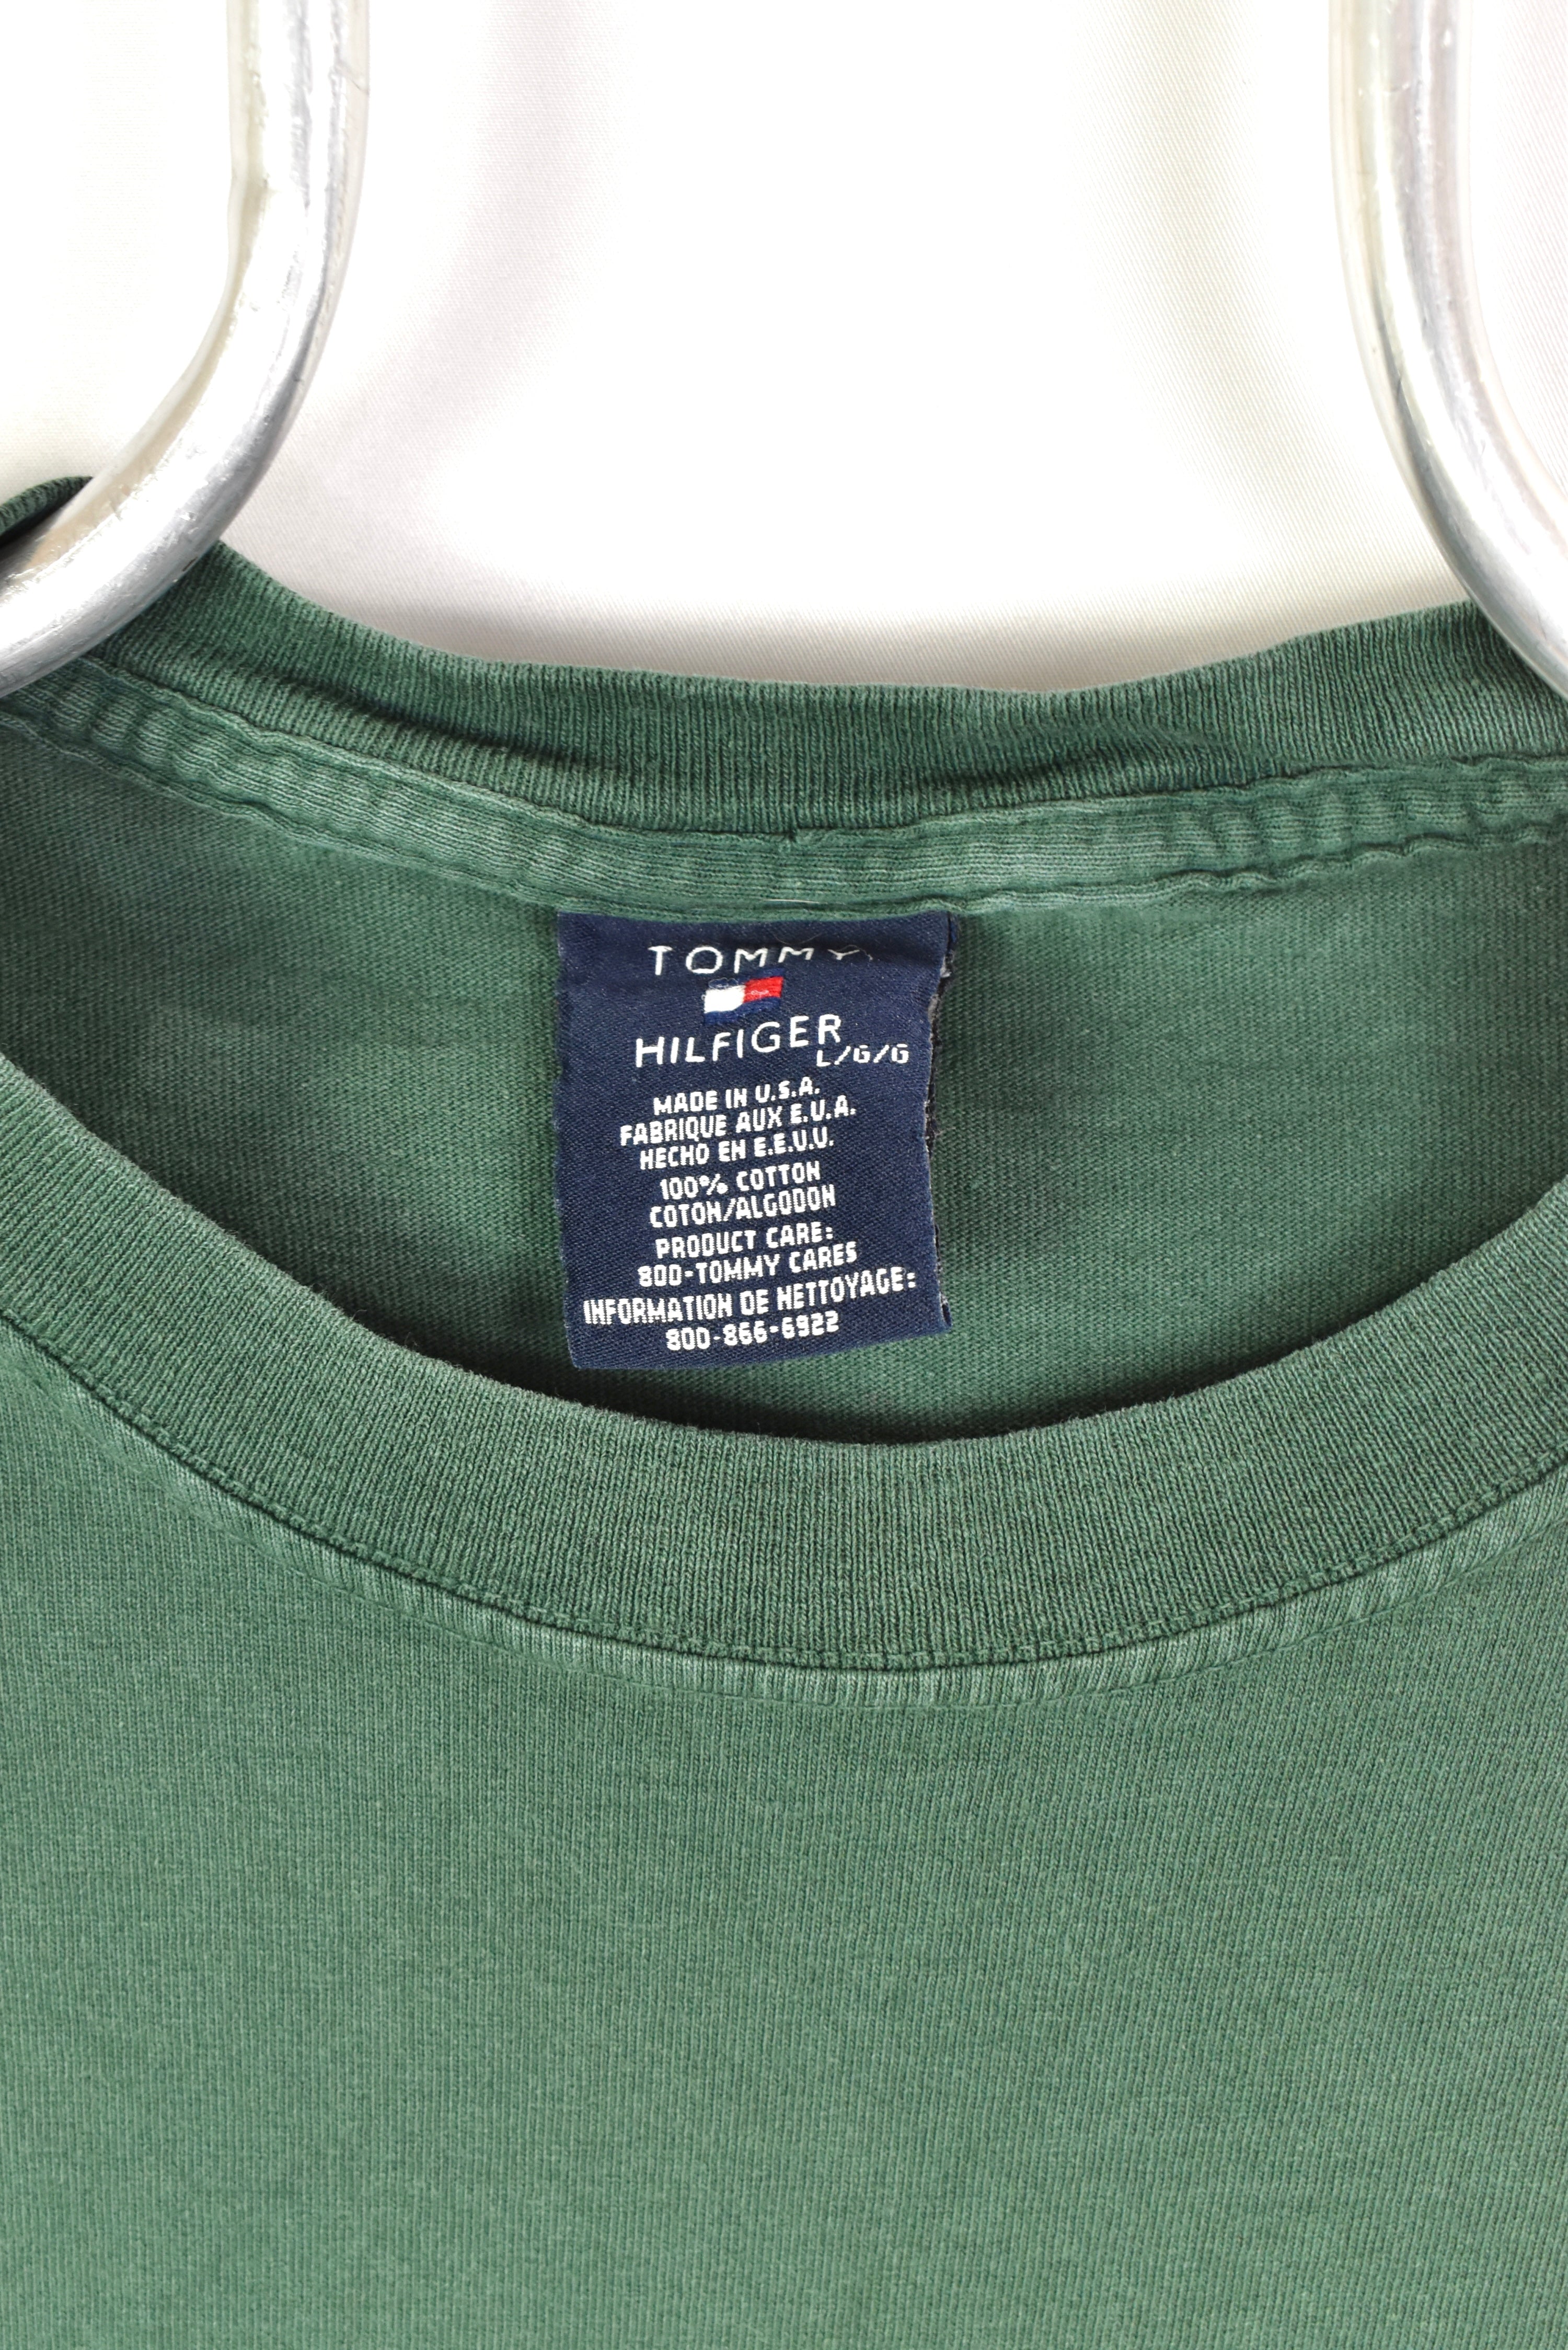 Vintage Tommy Hilfiger shirt, long sleeve graphic tee - large, green TOMMY HILFIGER